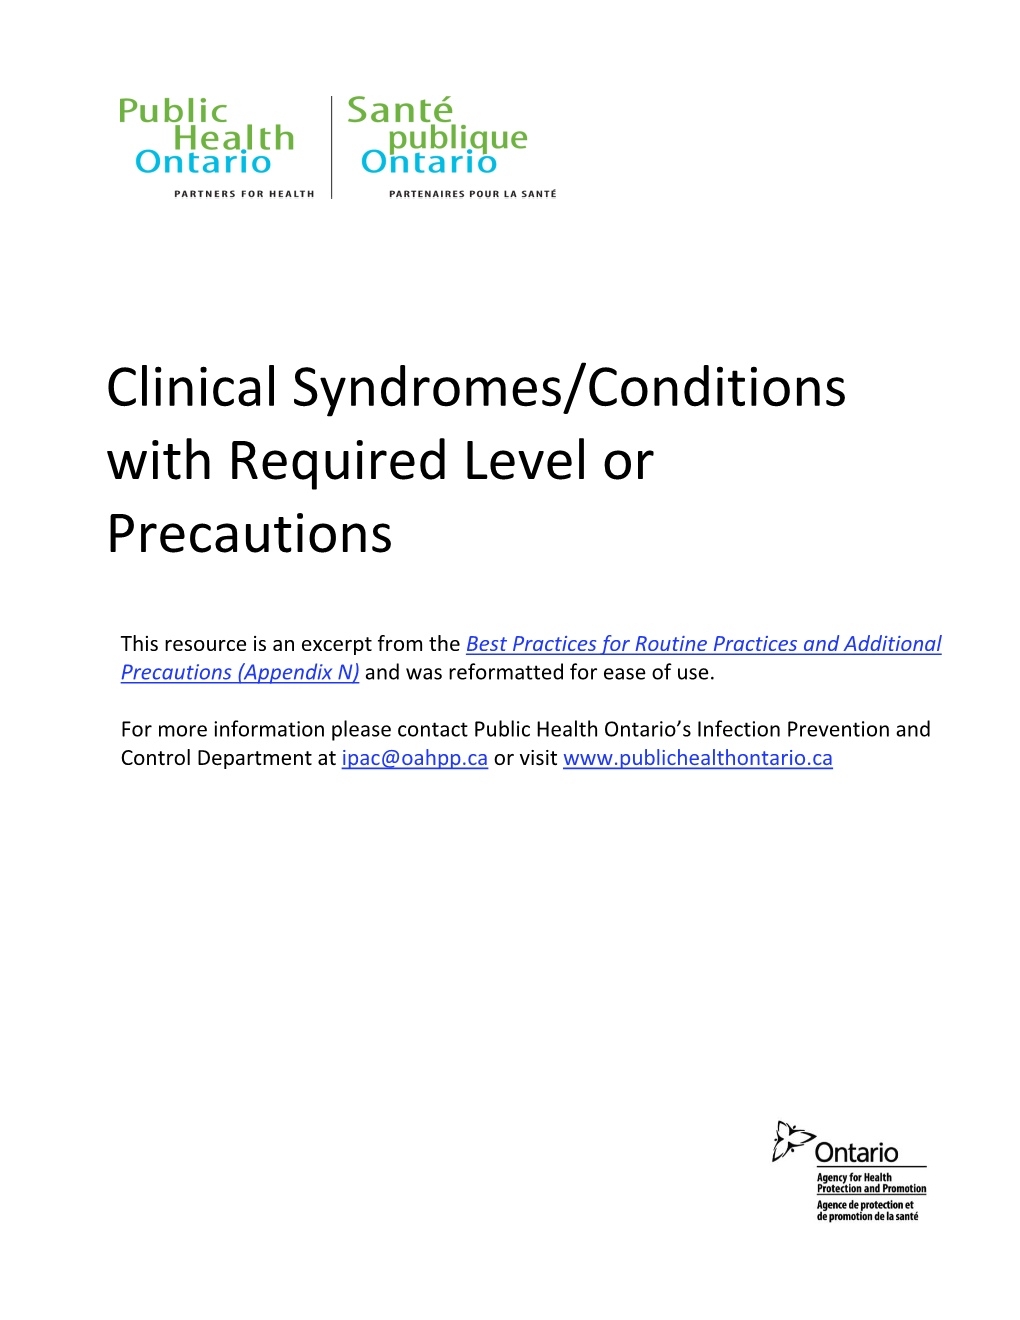 Clinical Syndromes/Conditions with Required Level Or Precautions